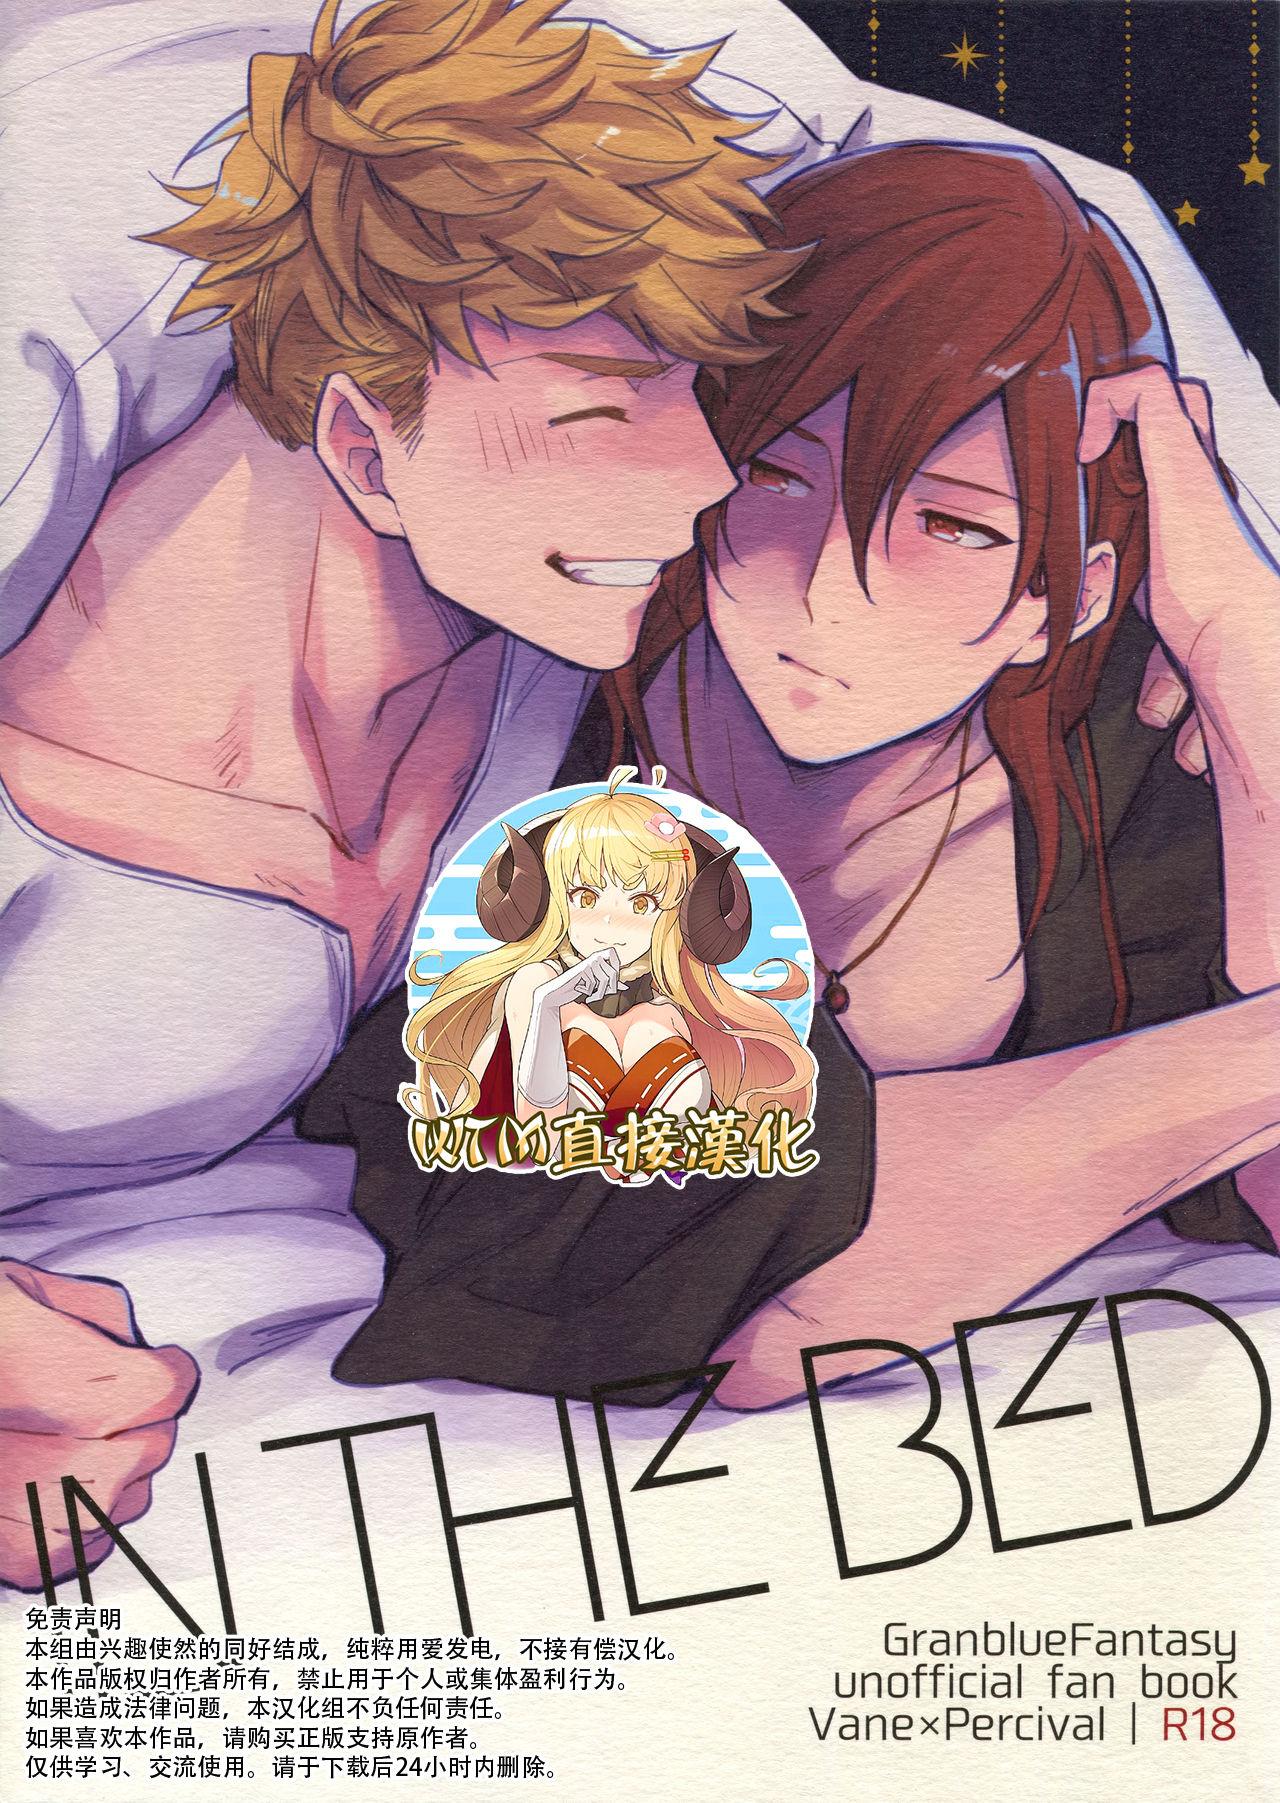 Hot Cunt in the bed - Granblue fantasy Eat - Page 1